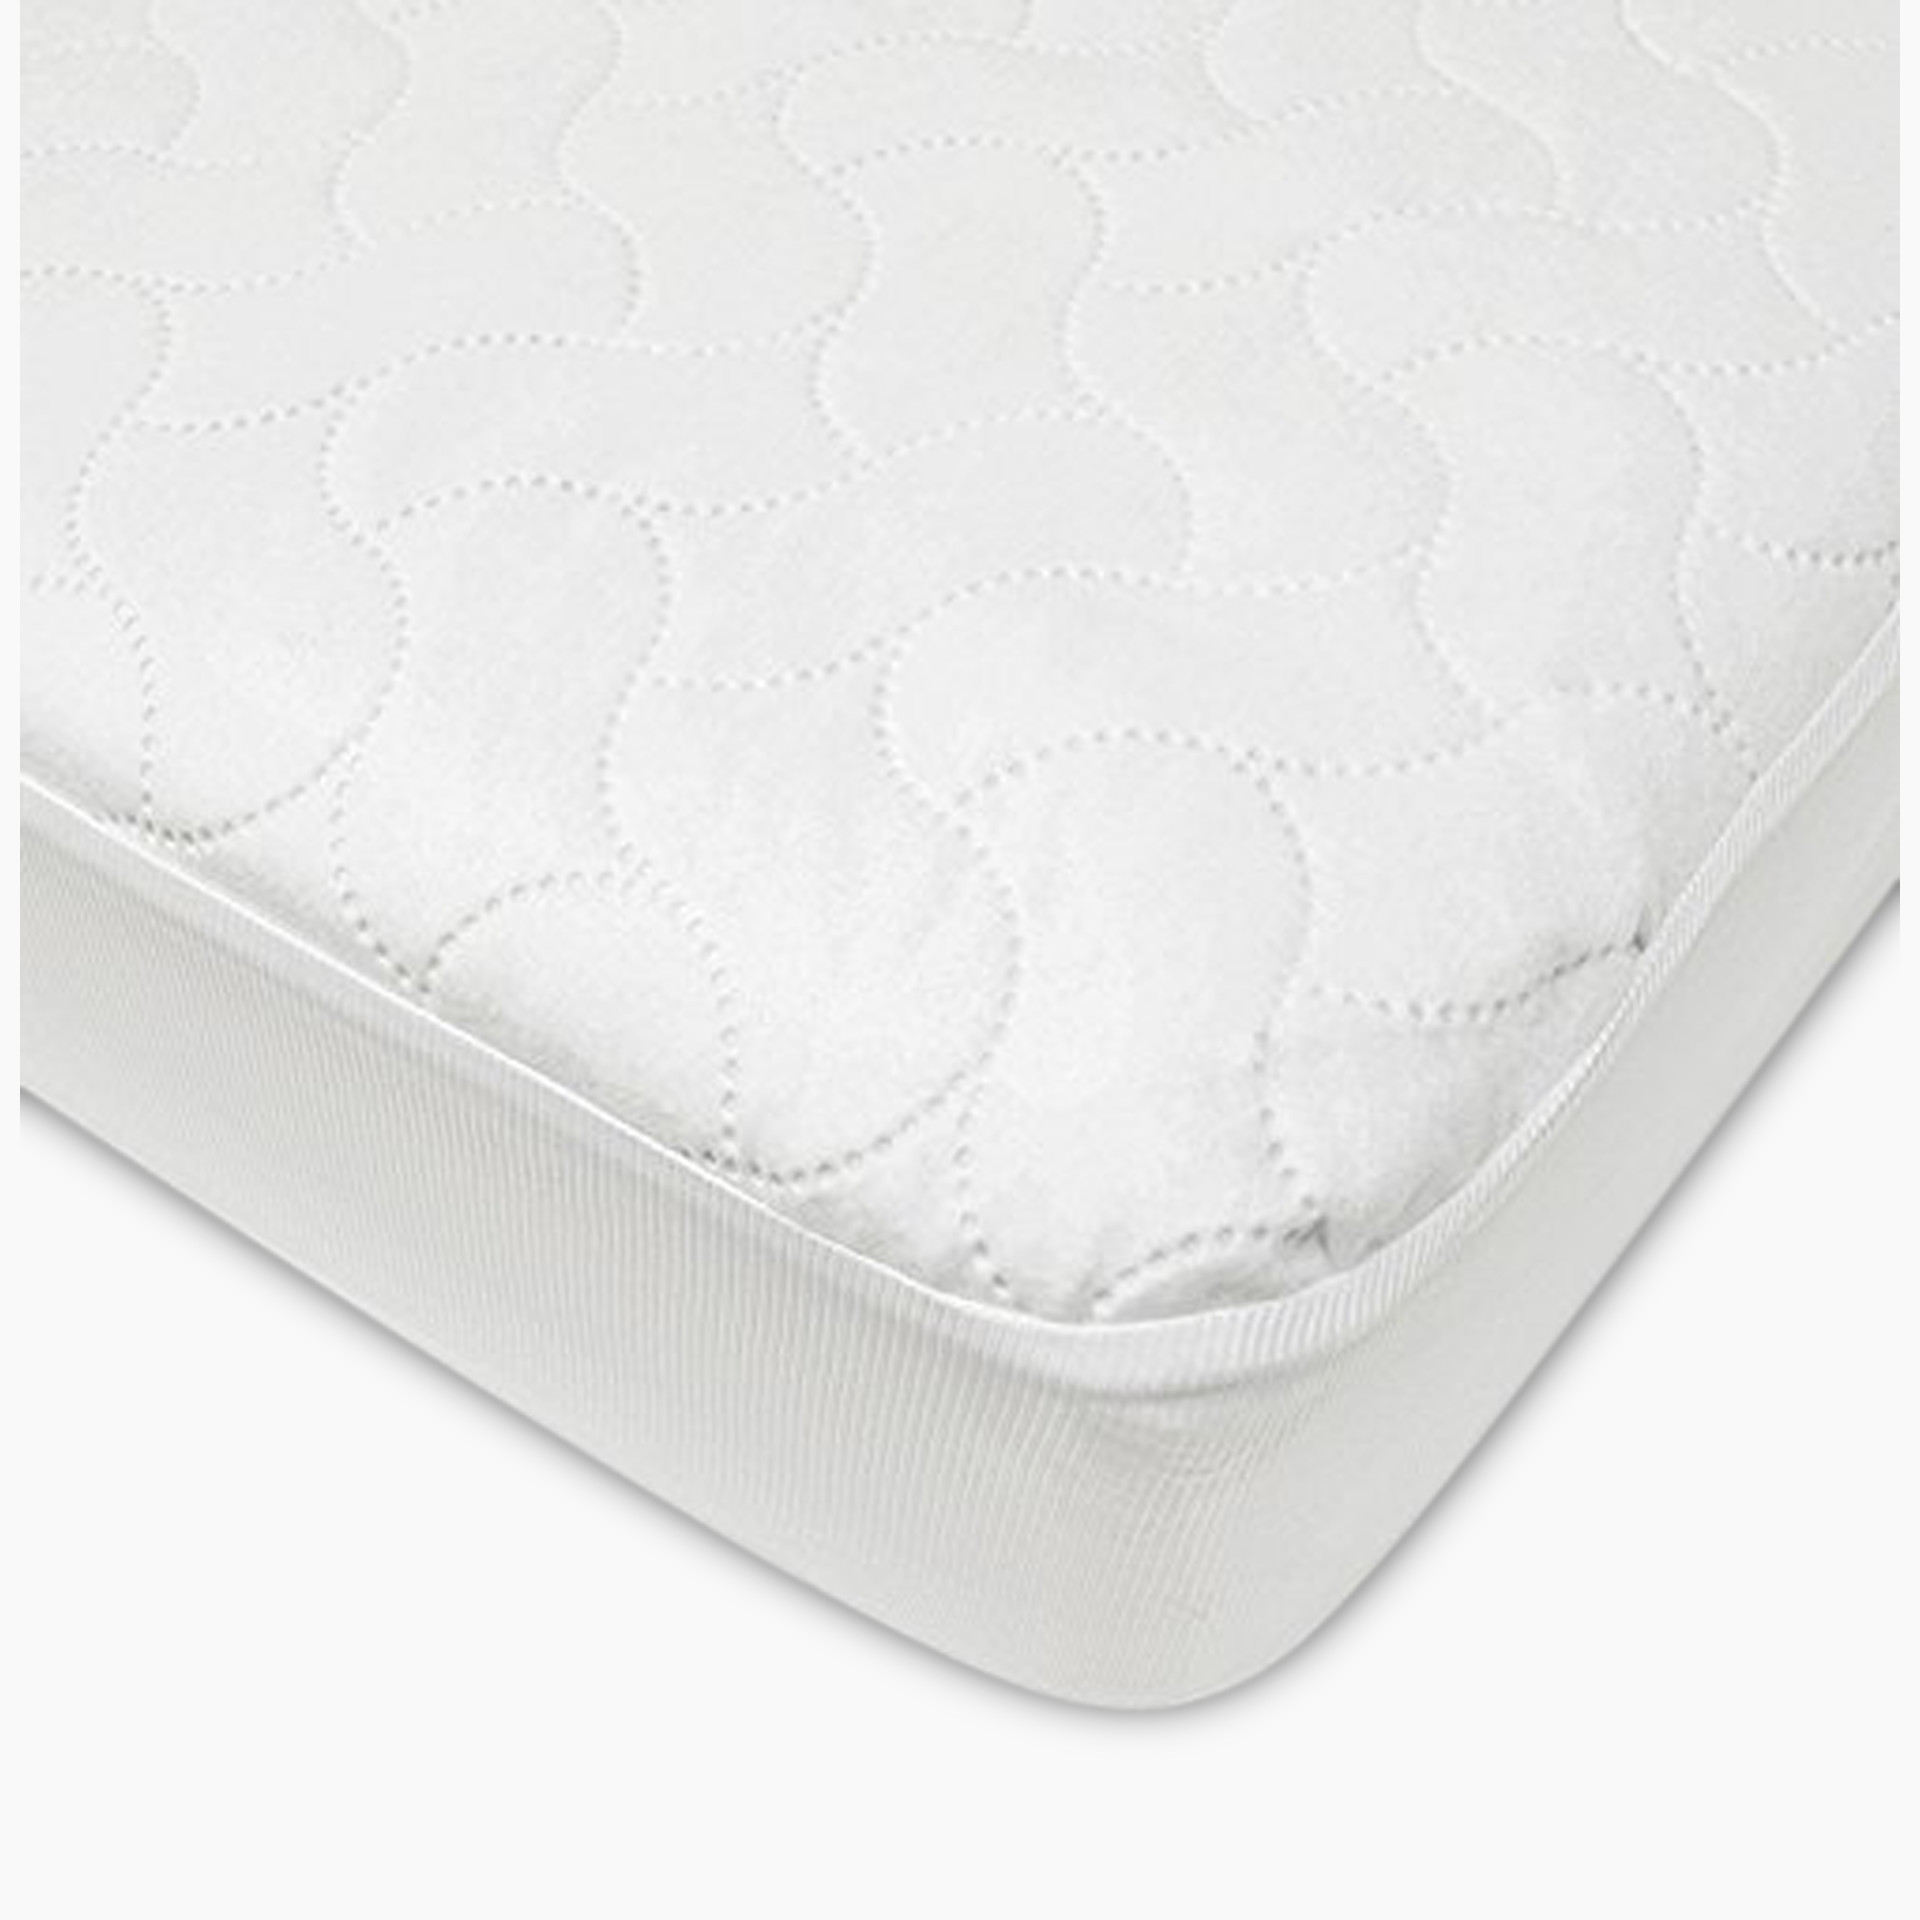 American Baby Company Fitted Waterproof Crib Mattress Pad Cover - White, 1  Pack